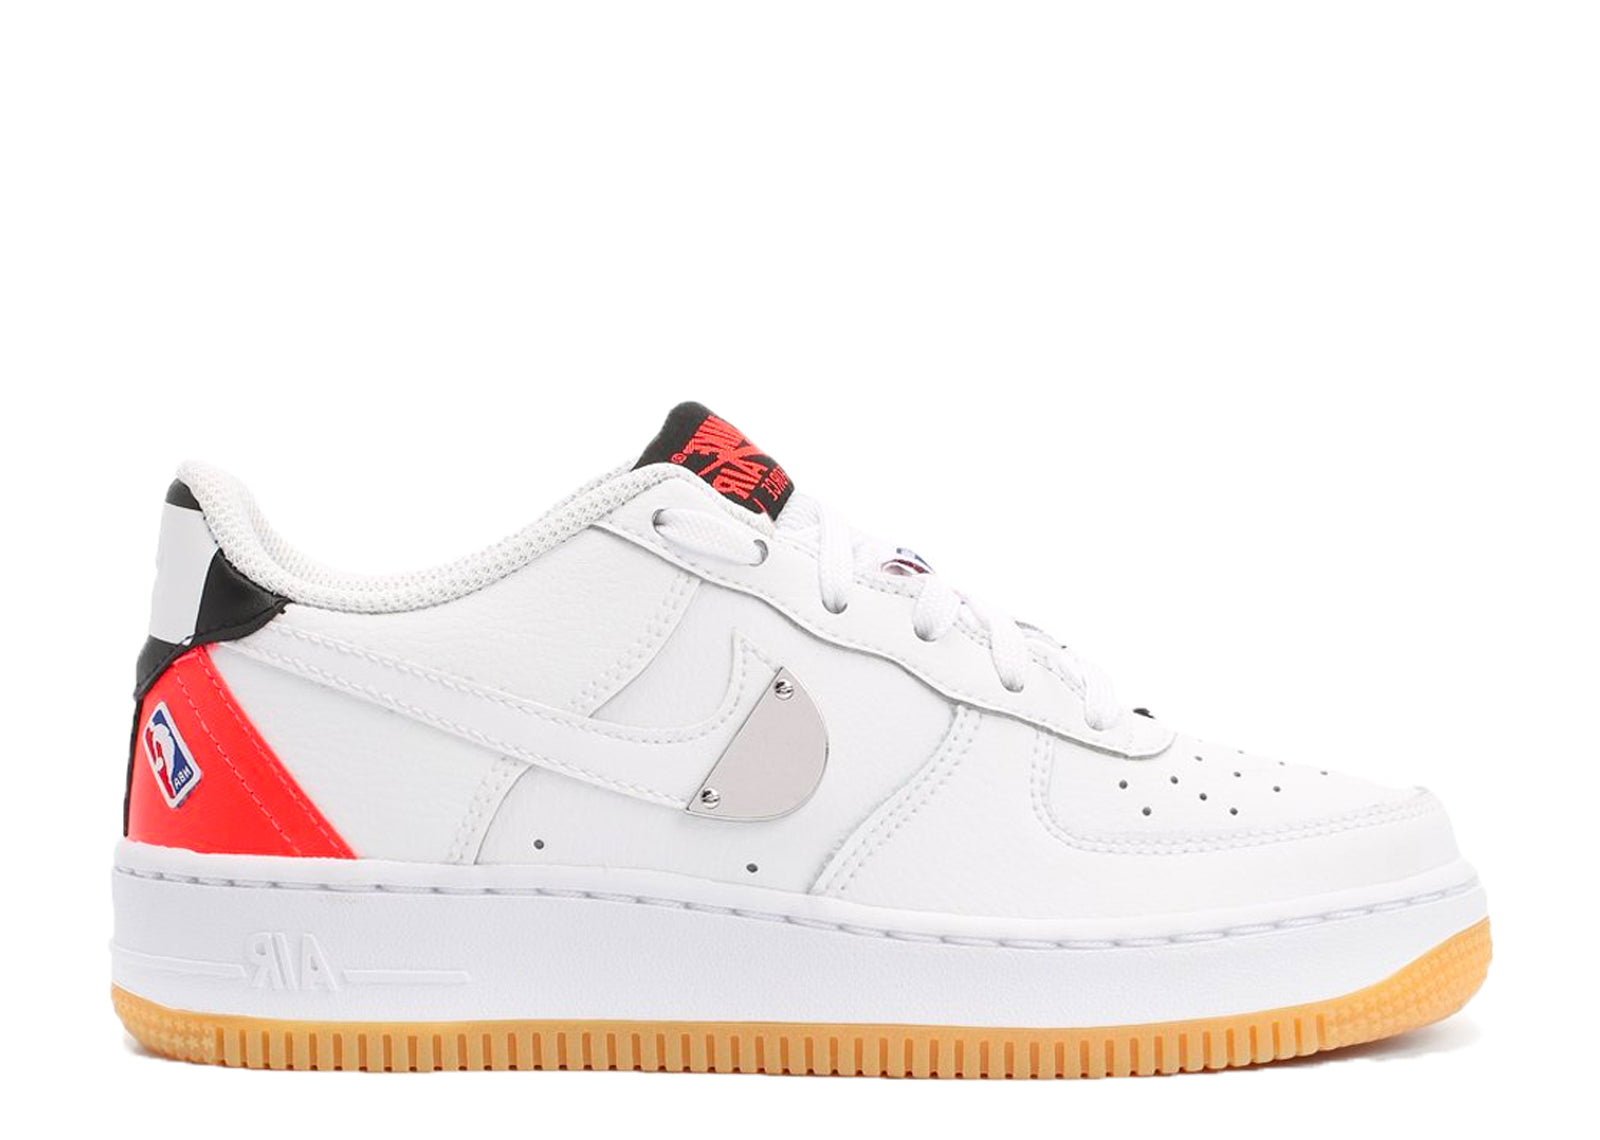 Second Chance - Nike Air Force 1 HO20 GS NBA White Bright Crimson - 38,5 | NEW